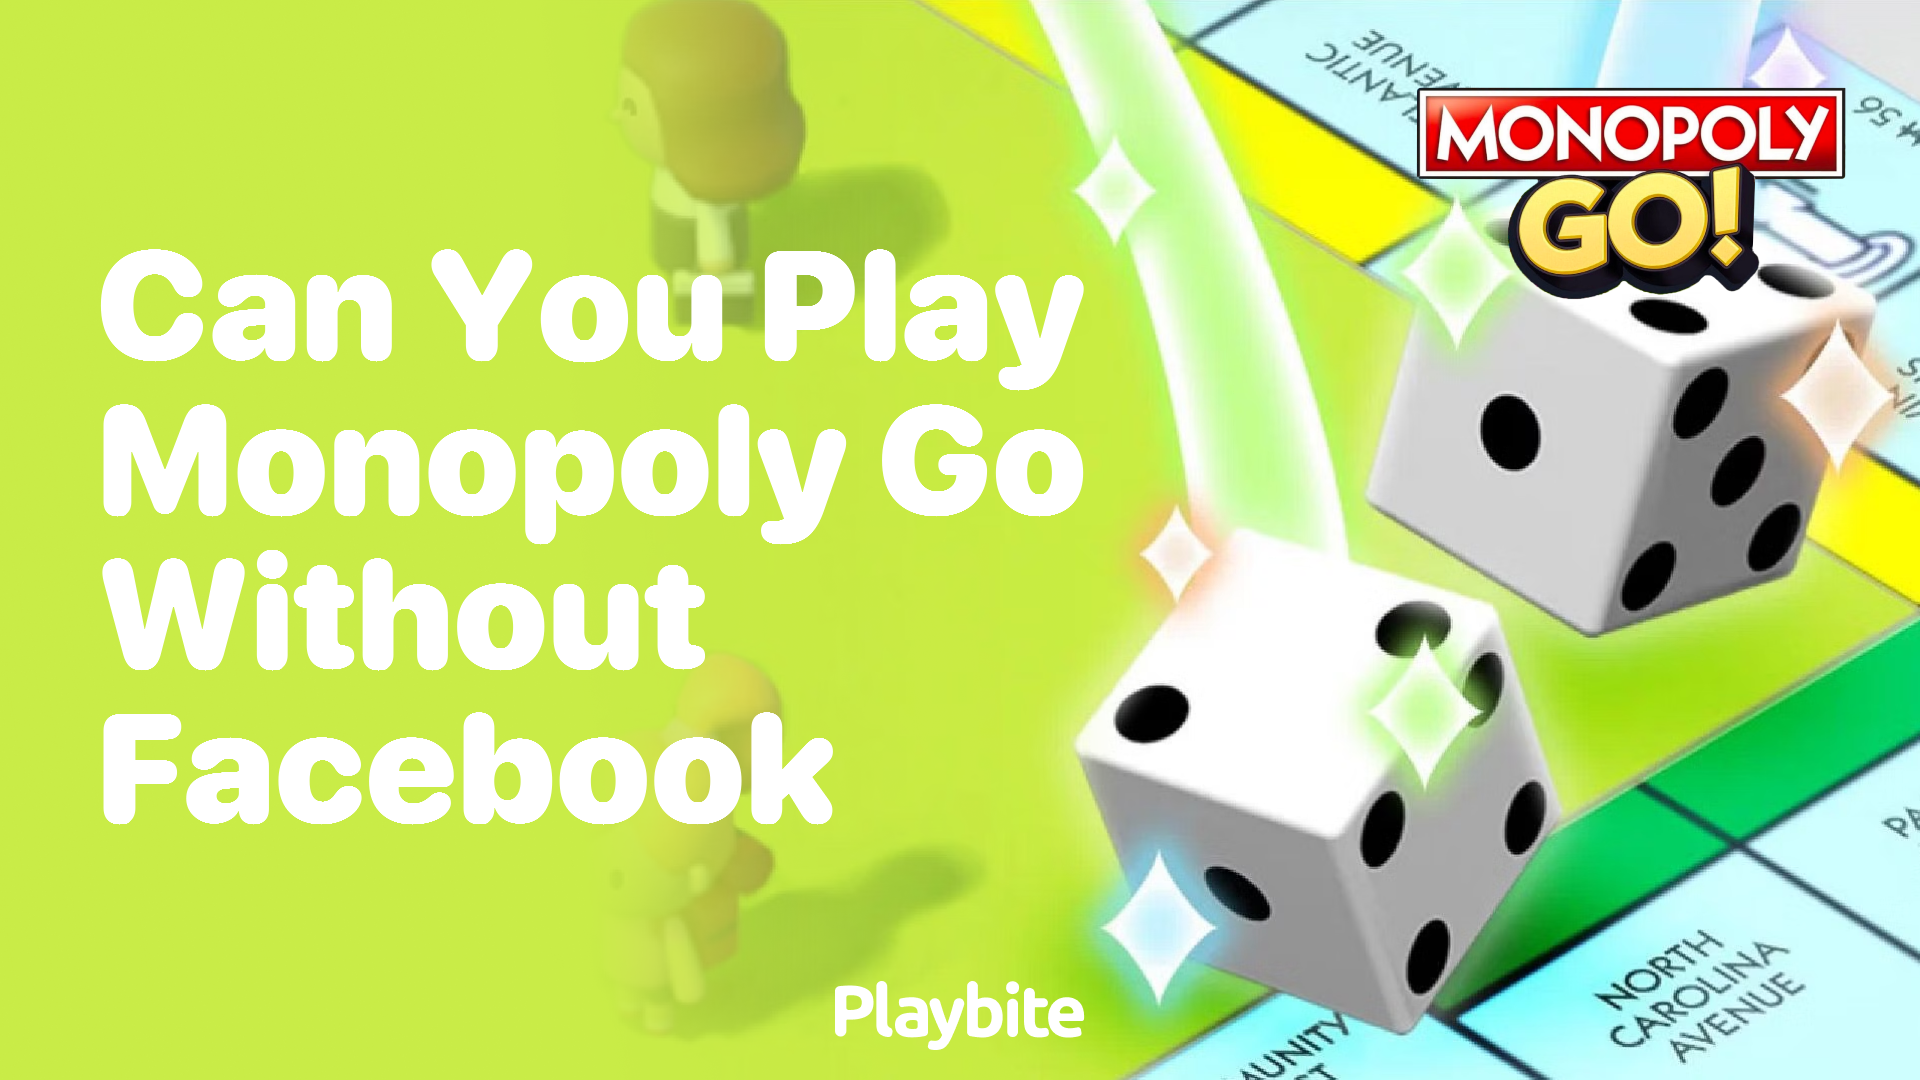 Can You Play Monopoly Go Without Facebook?